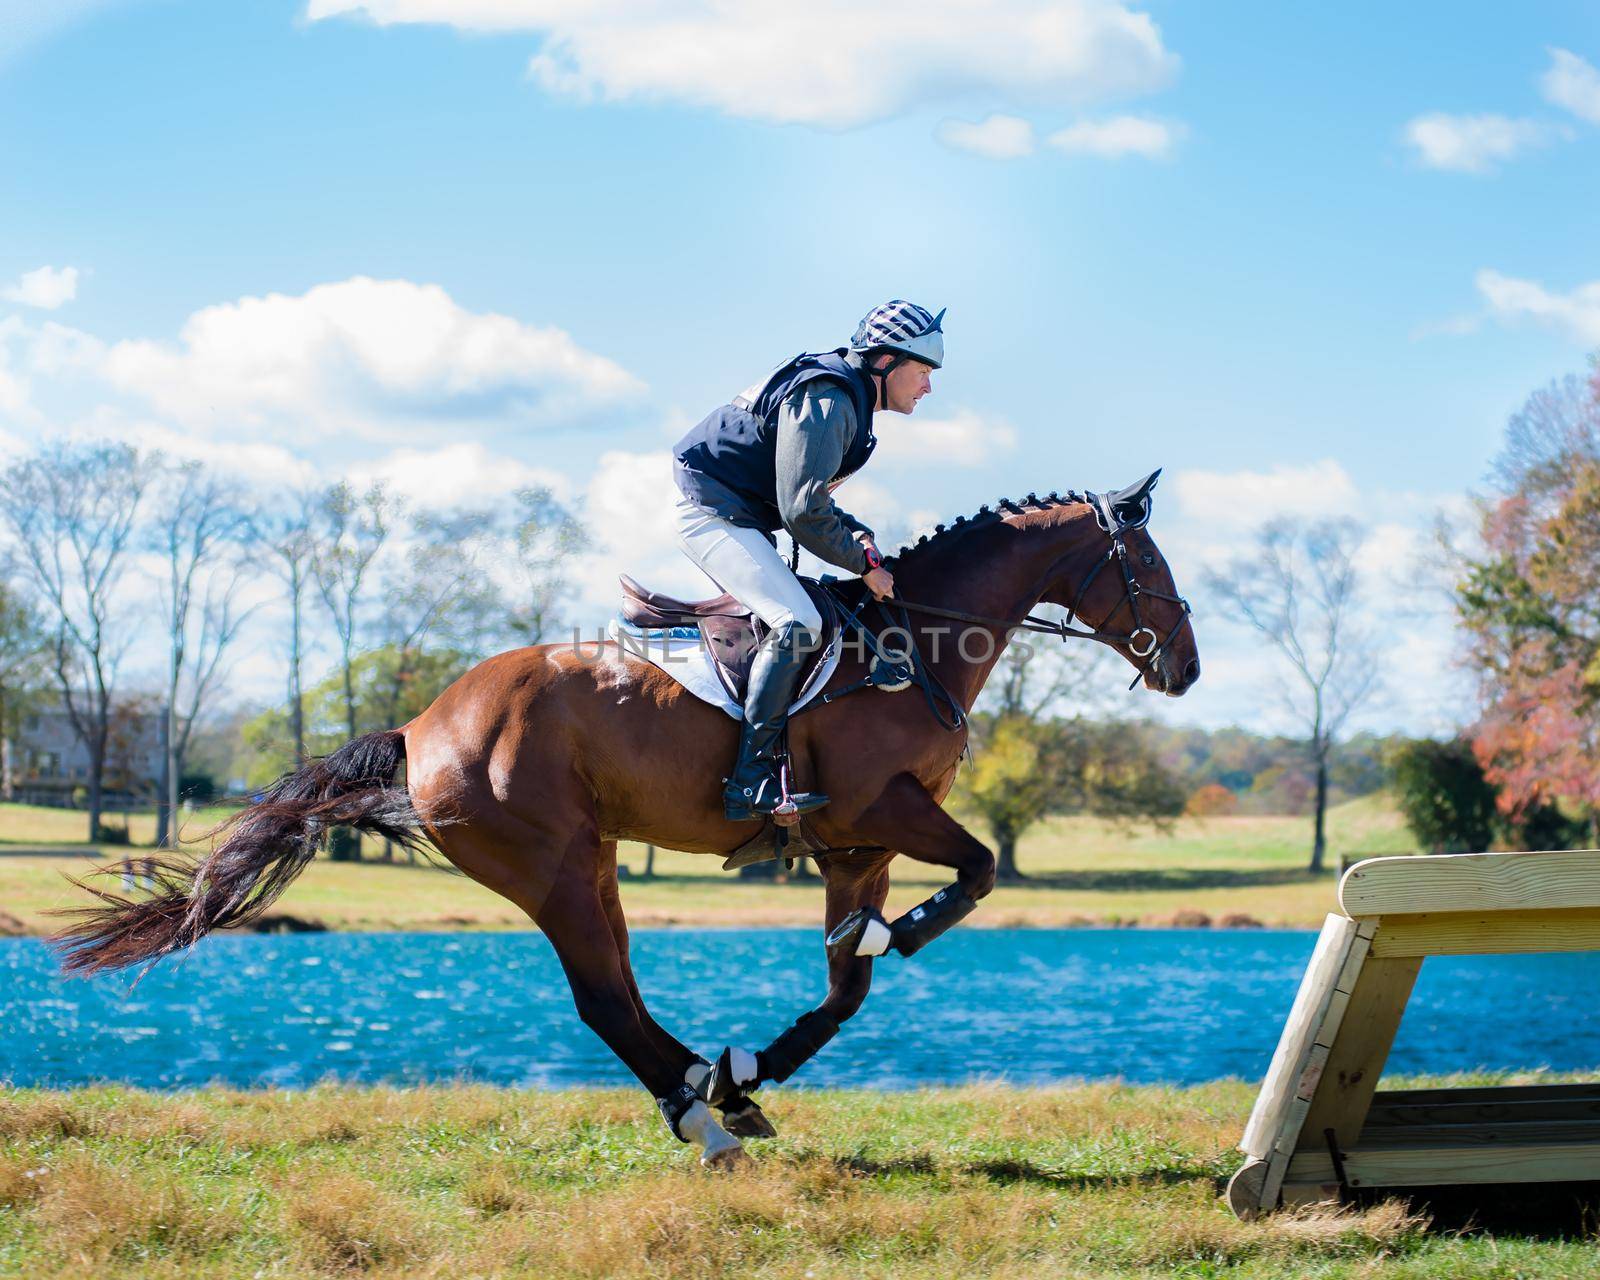 Equestrian competition photos including cross country horse riders